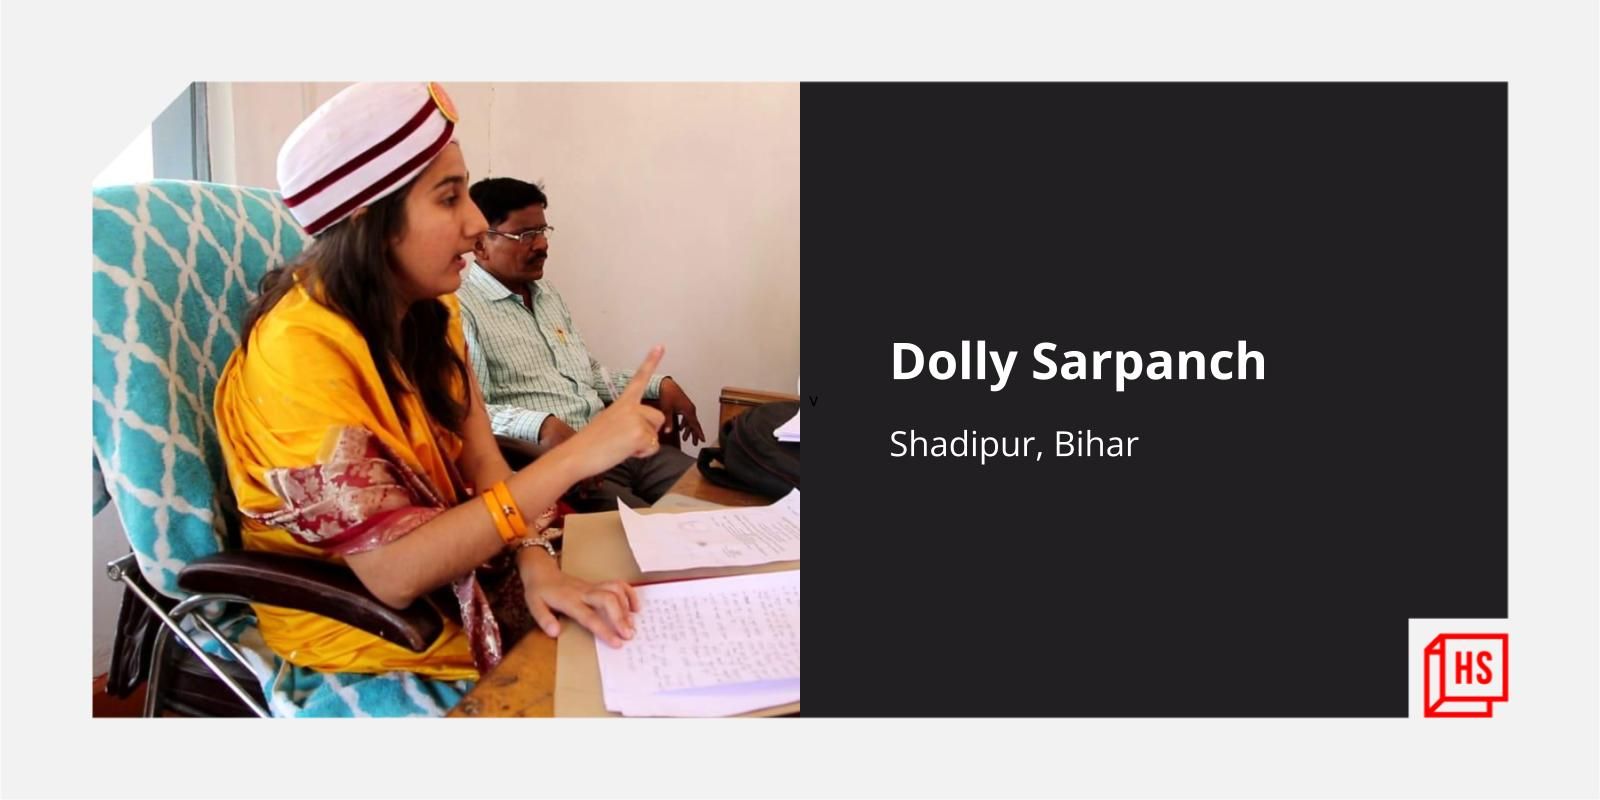 Meet Dolly Sarpanch who is digitising law and order in her remote village in Bihar
